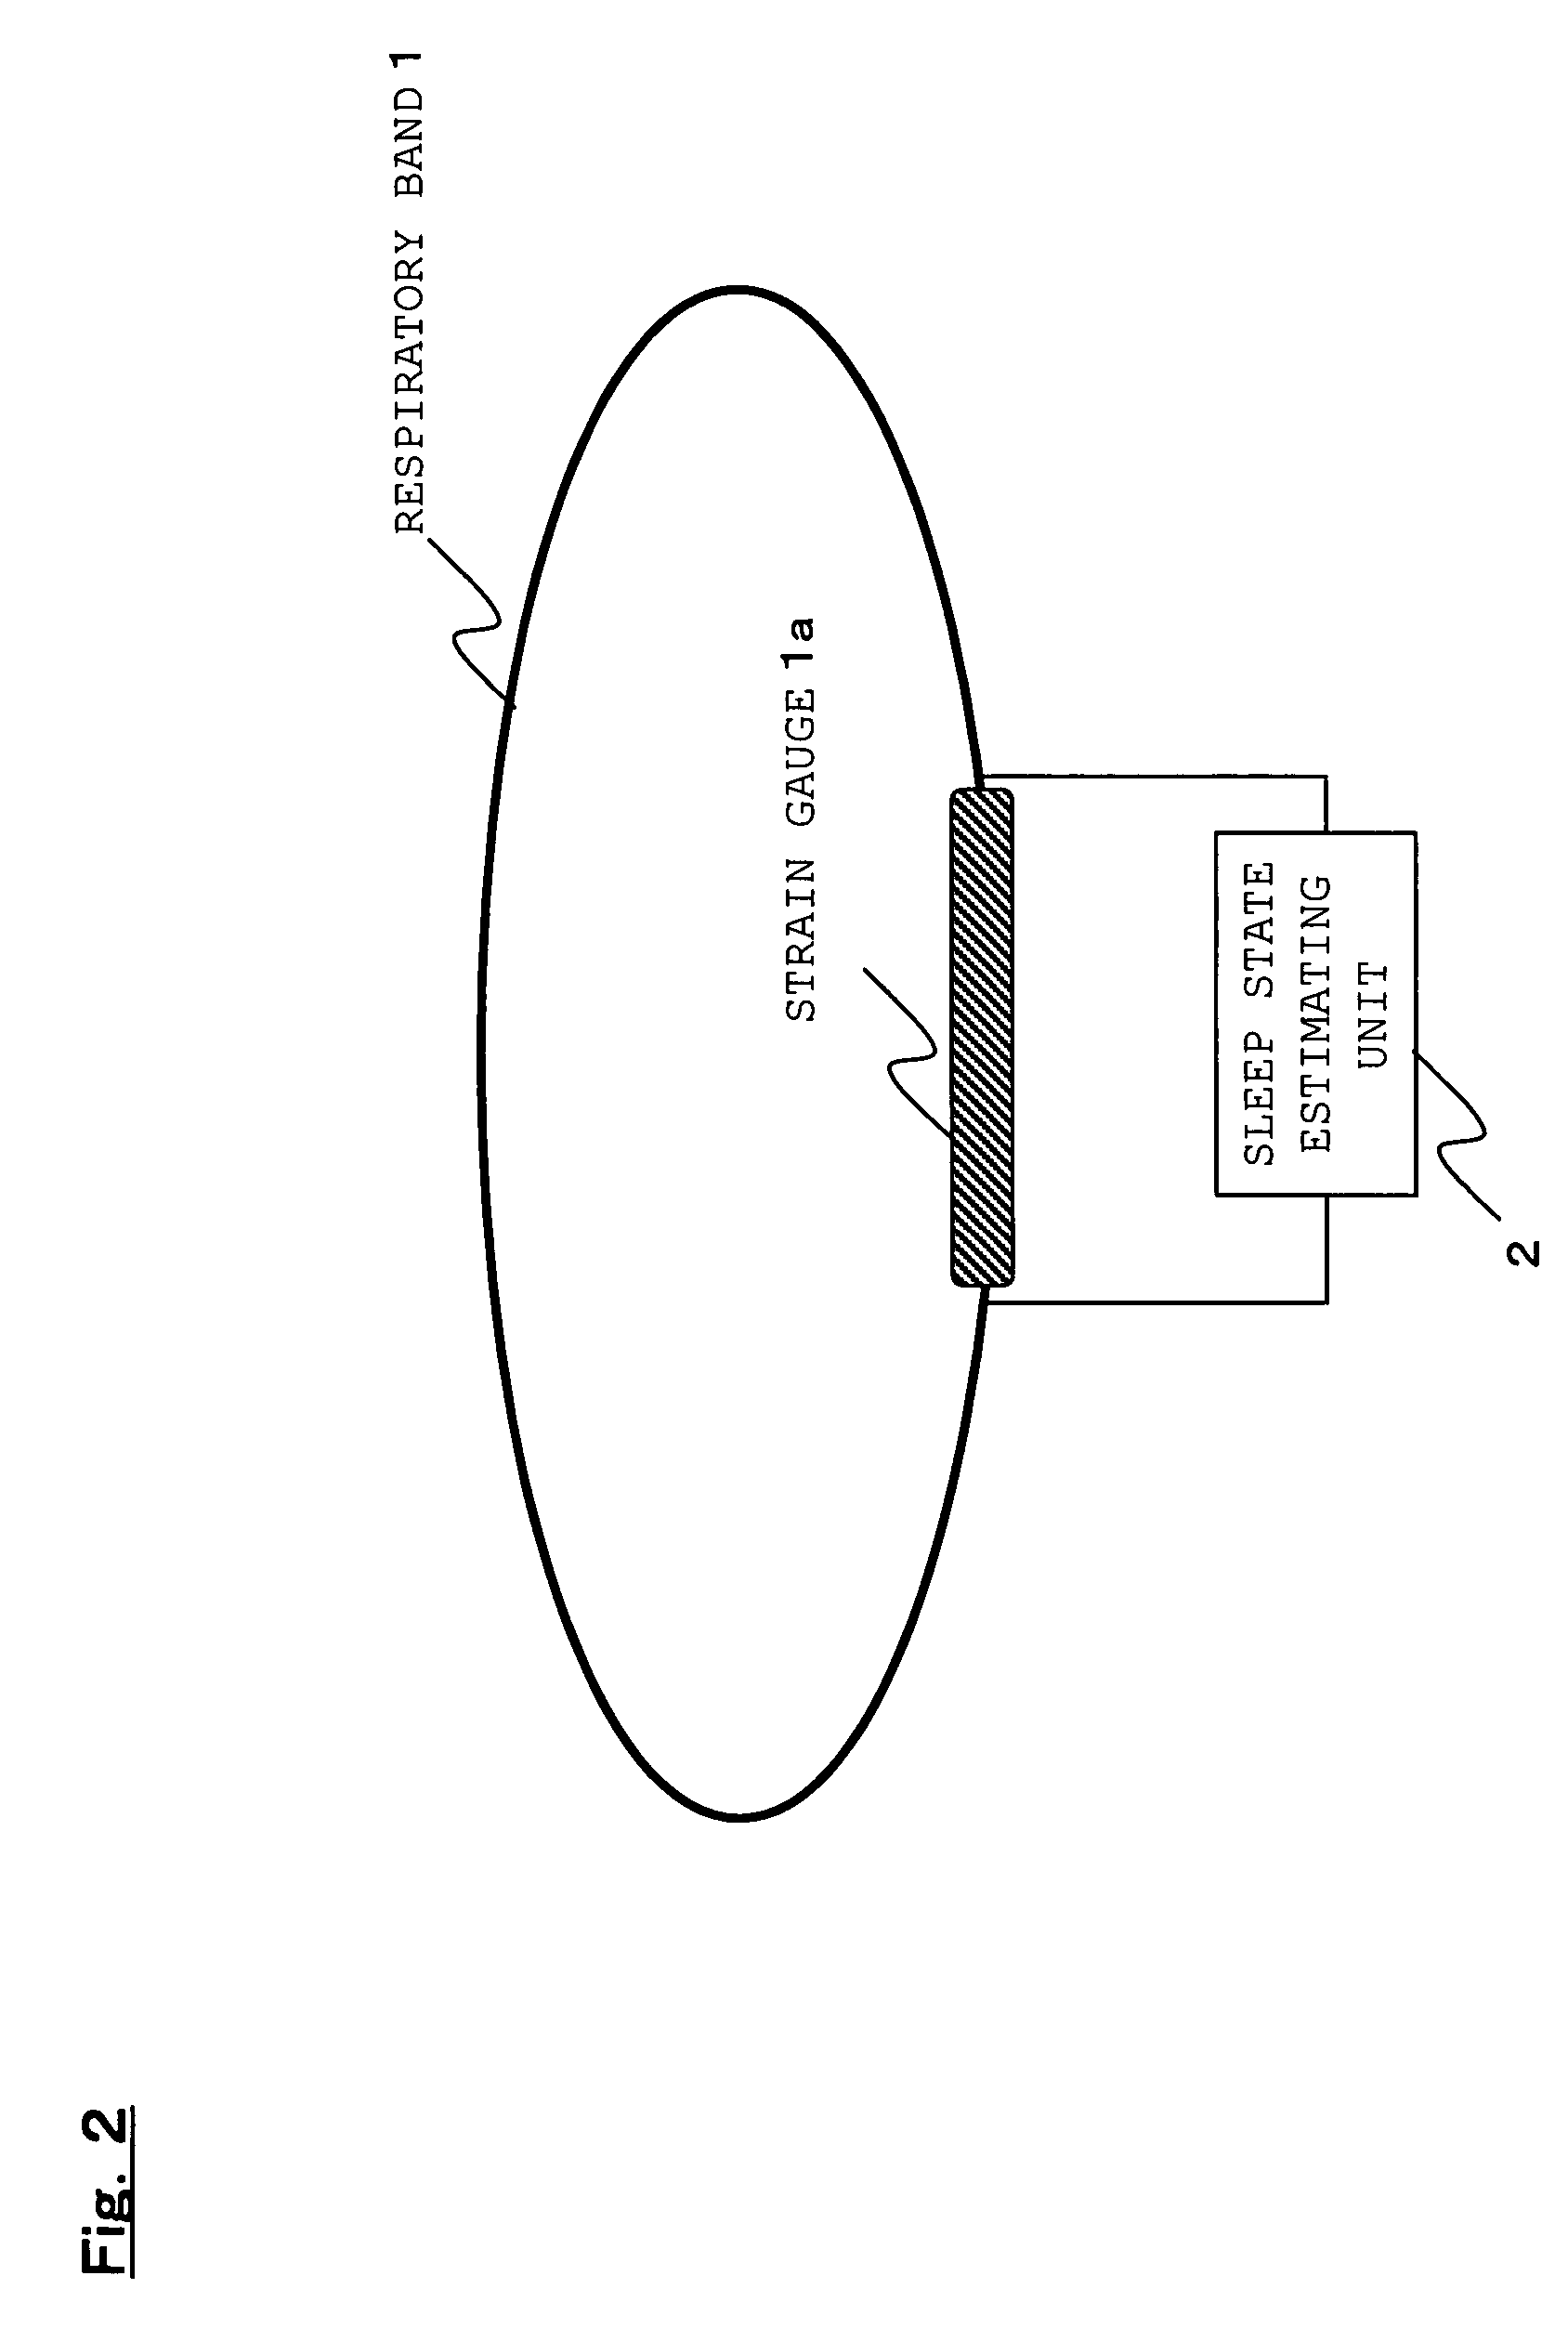 Sleep state estimation device and program product for providing a computer with a sleep state estimation function